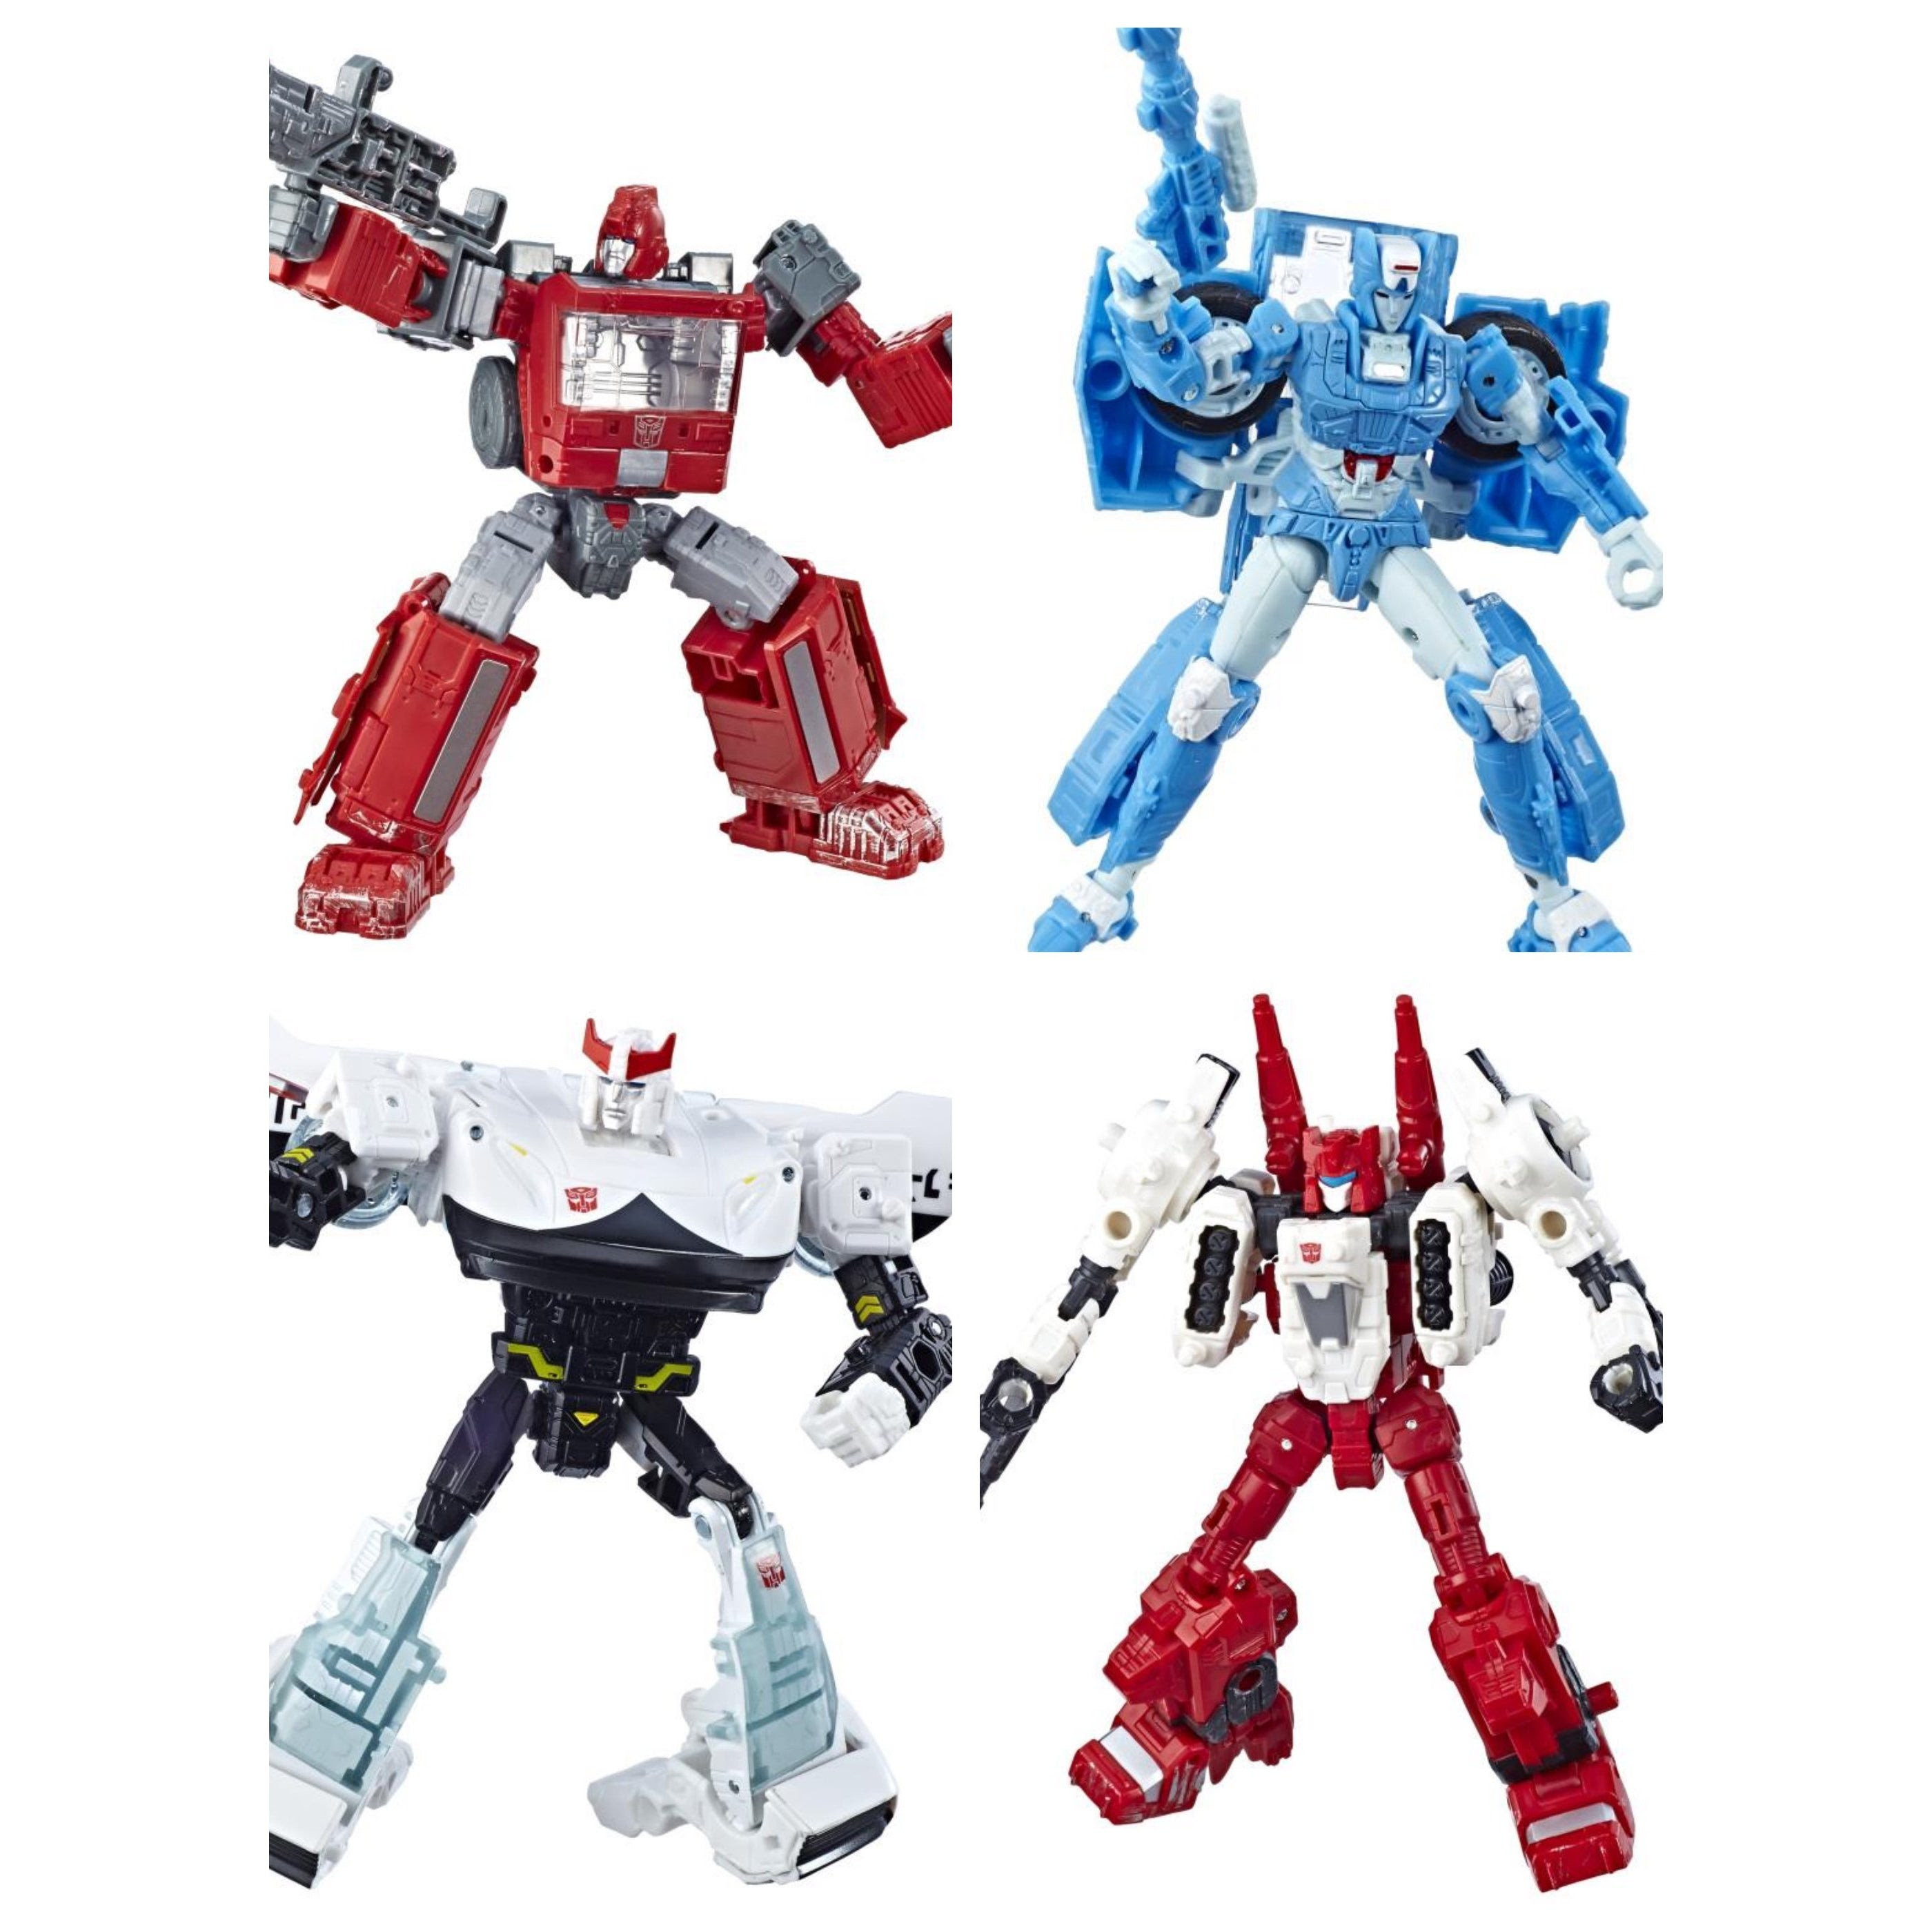 Image of Transformers War for Cybertron: Siege Deluxe Wave 2 - Set of 4 - FEBRUARY 2019